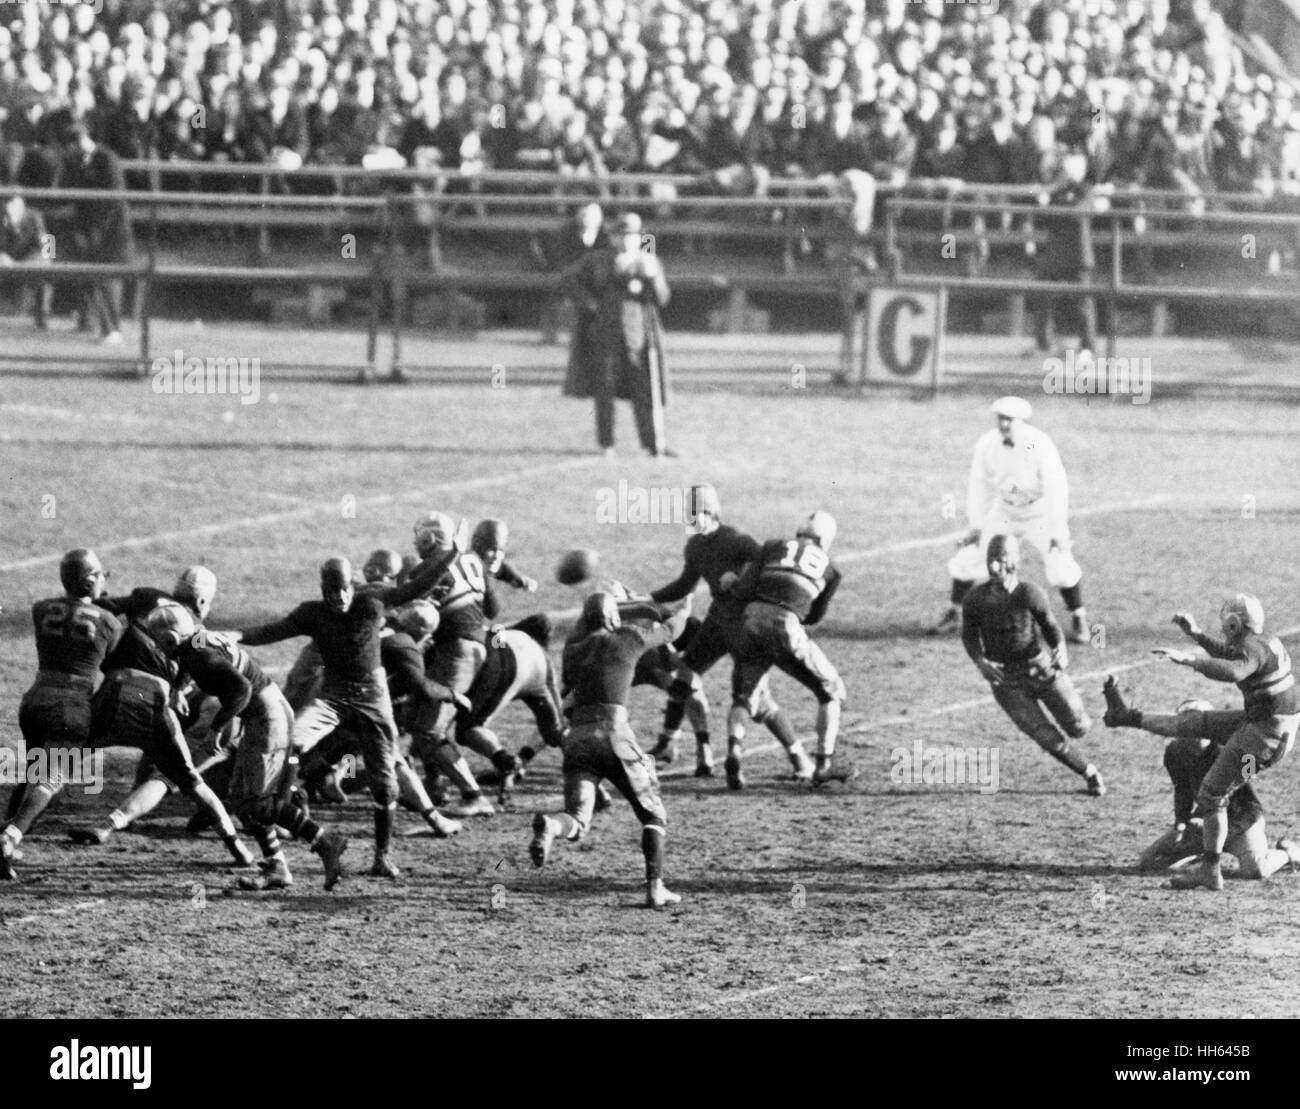 American football match between Army and Navy teams at the Yankee Stadium, New York City, USA, 12 December 1931. Stock Photo